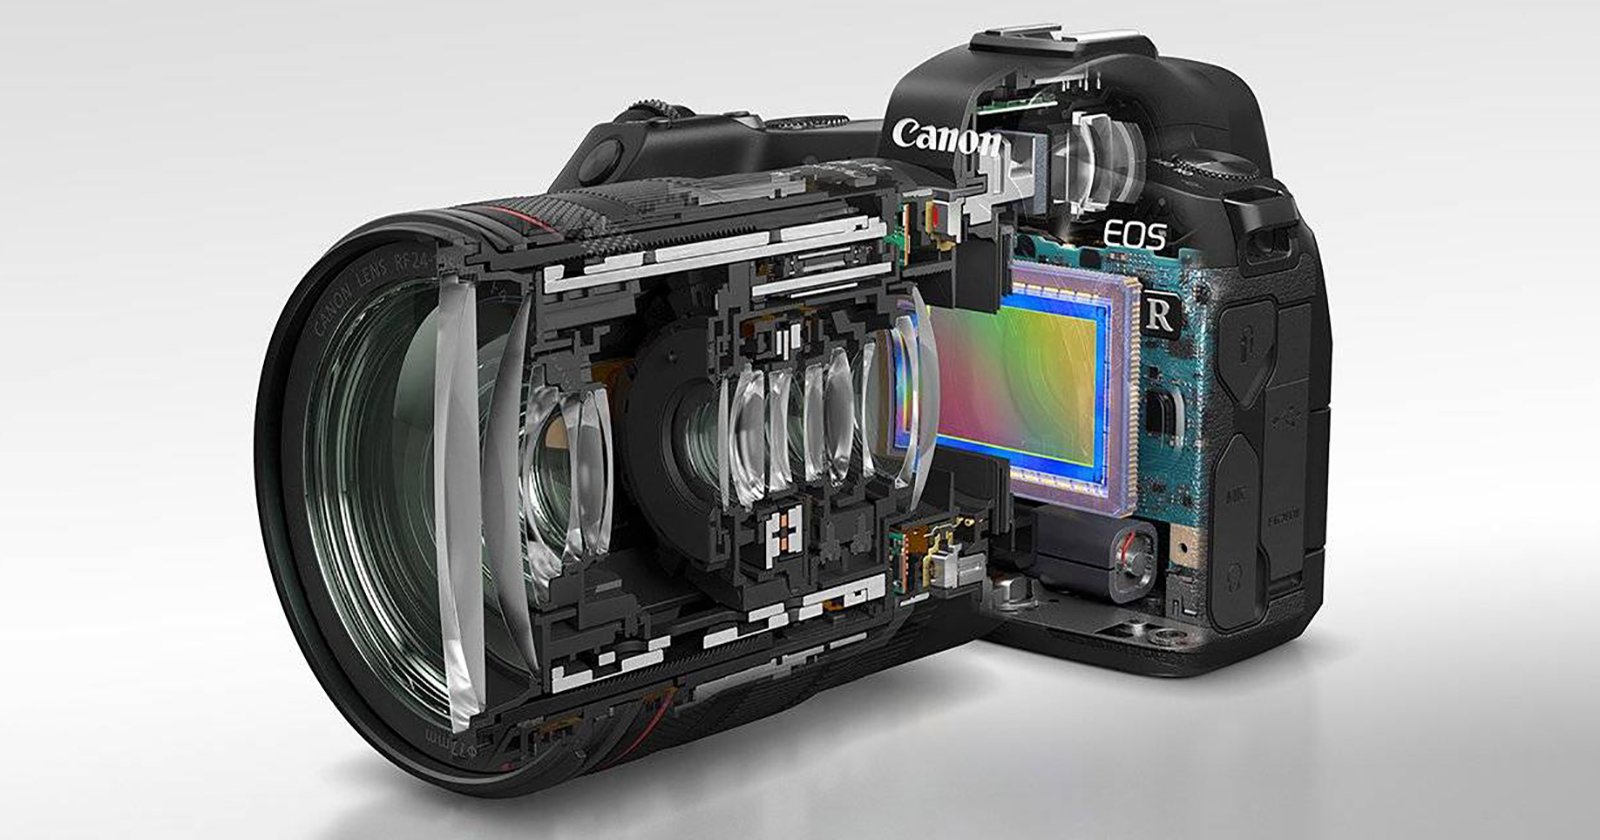 Canon Says IBIS and Dual Card Slots Coming to High End EOS R Model